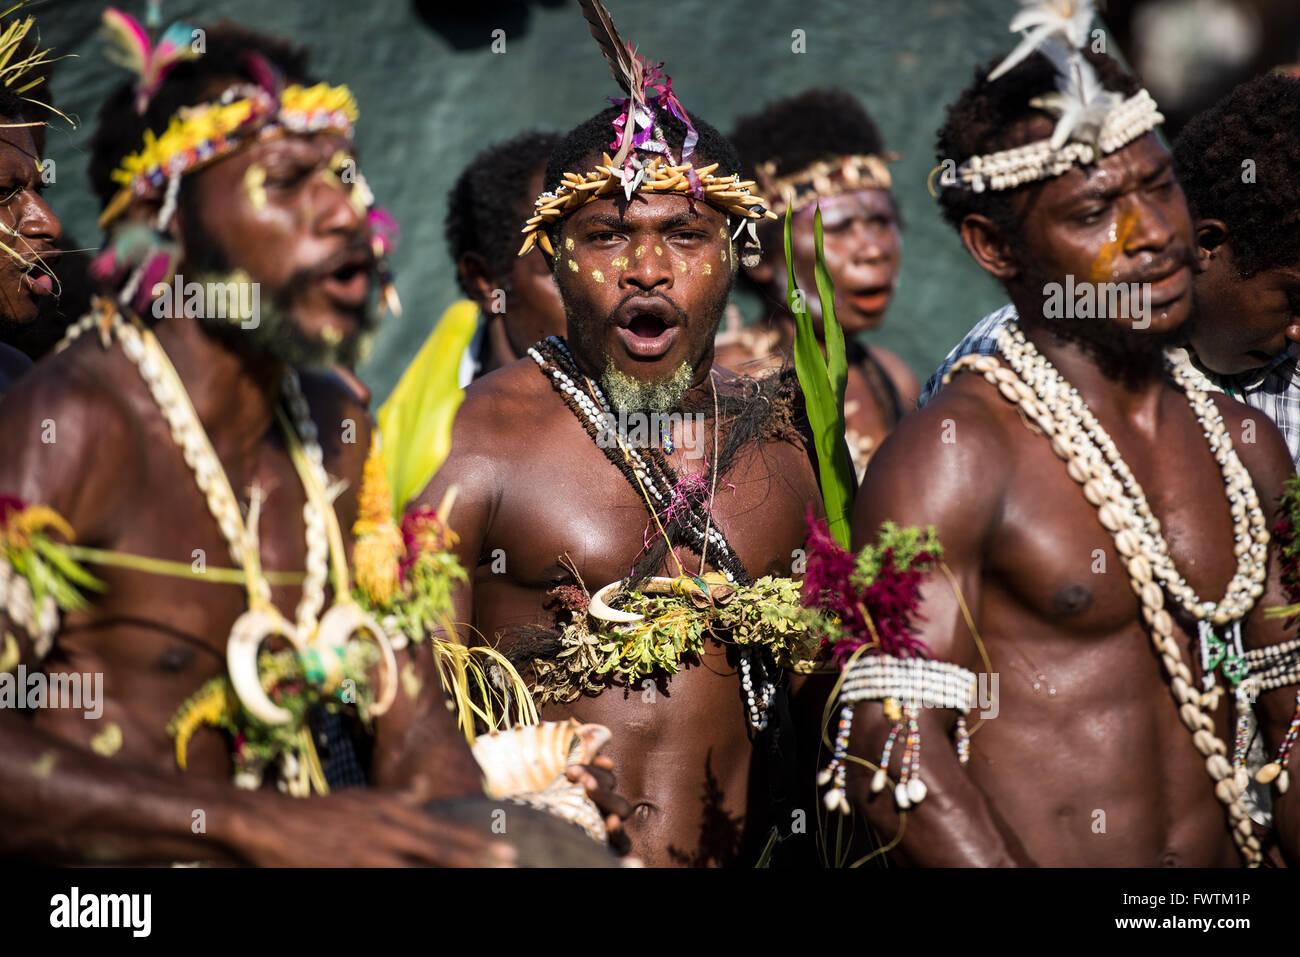 Local Dancers men performing a traditional dance Tolokiwa, Papua New Guinea Stock Photo